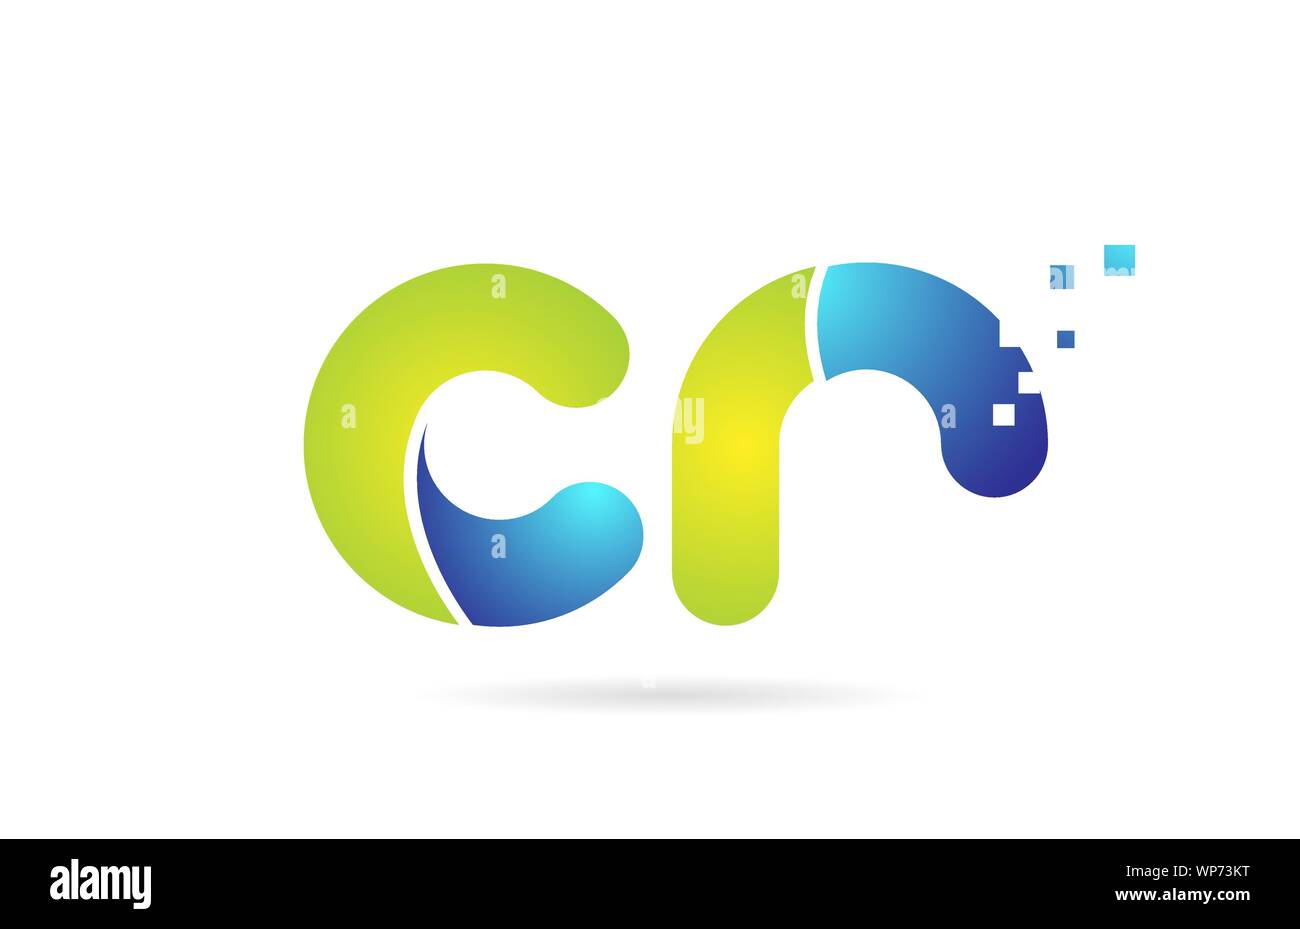 cr c r blue green alphabet combination letter logo design suitable for a company or business Stock Vector